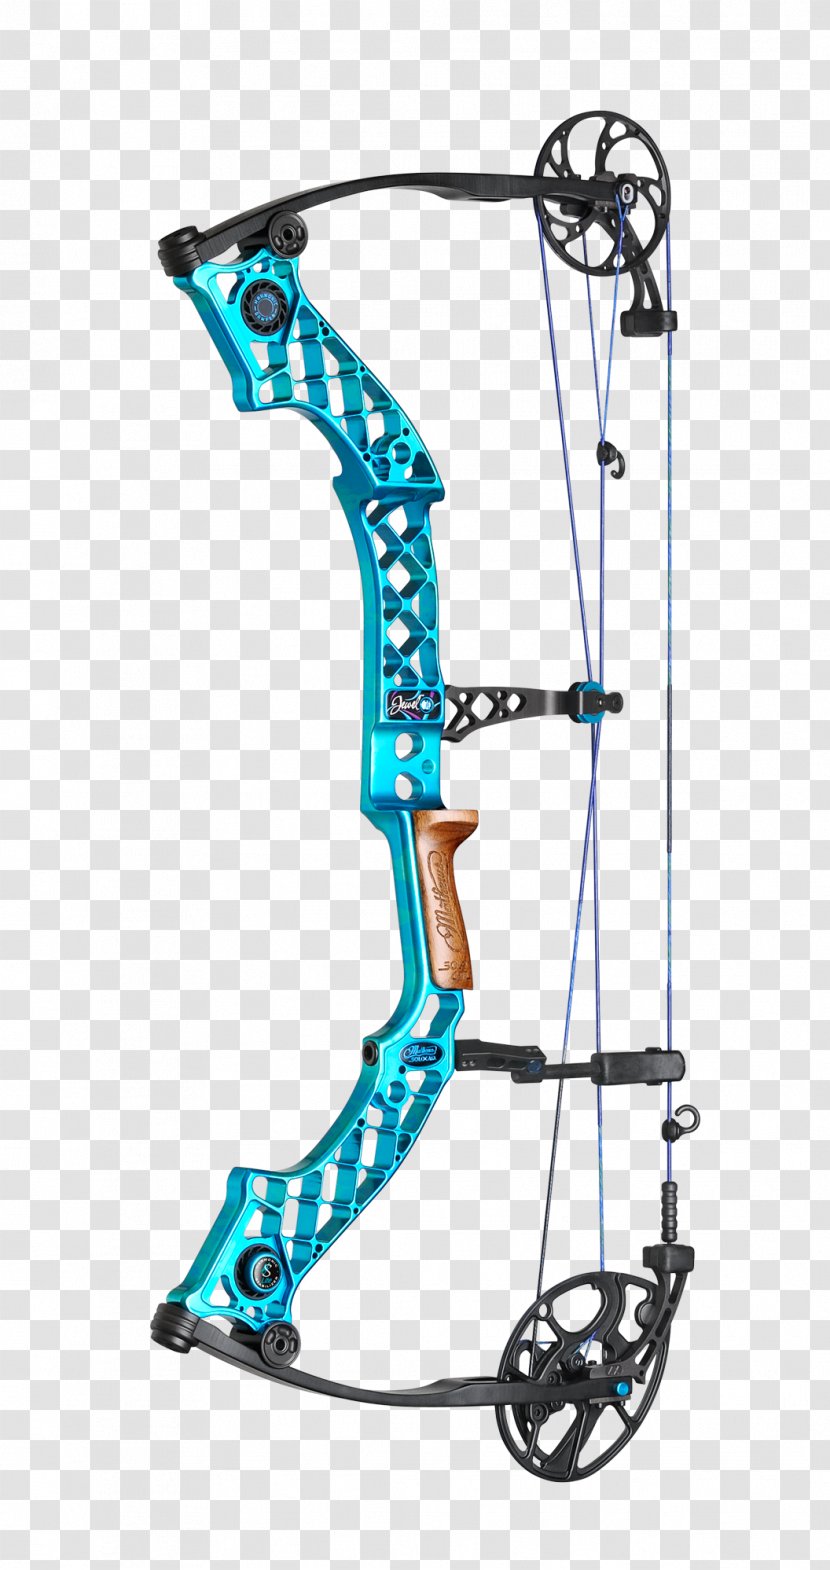 Compound Bows Bow And Arrow Archery Bowhunting - Tree - Teal Color Transparent PNG